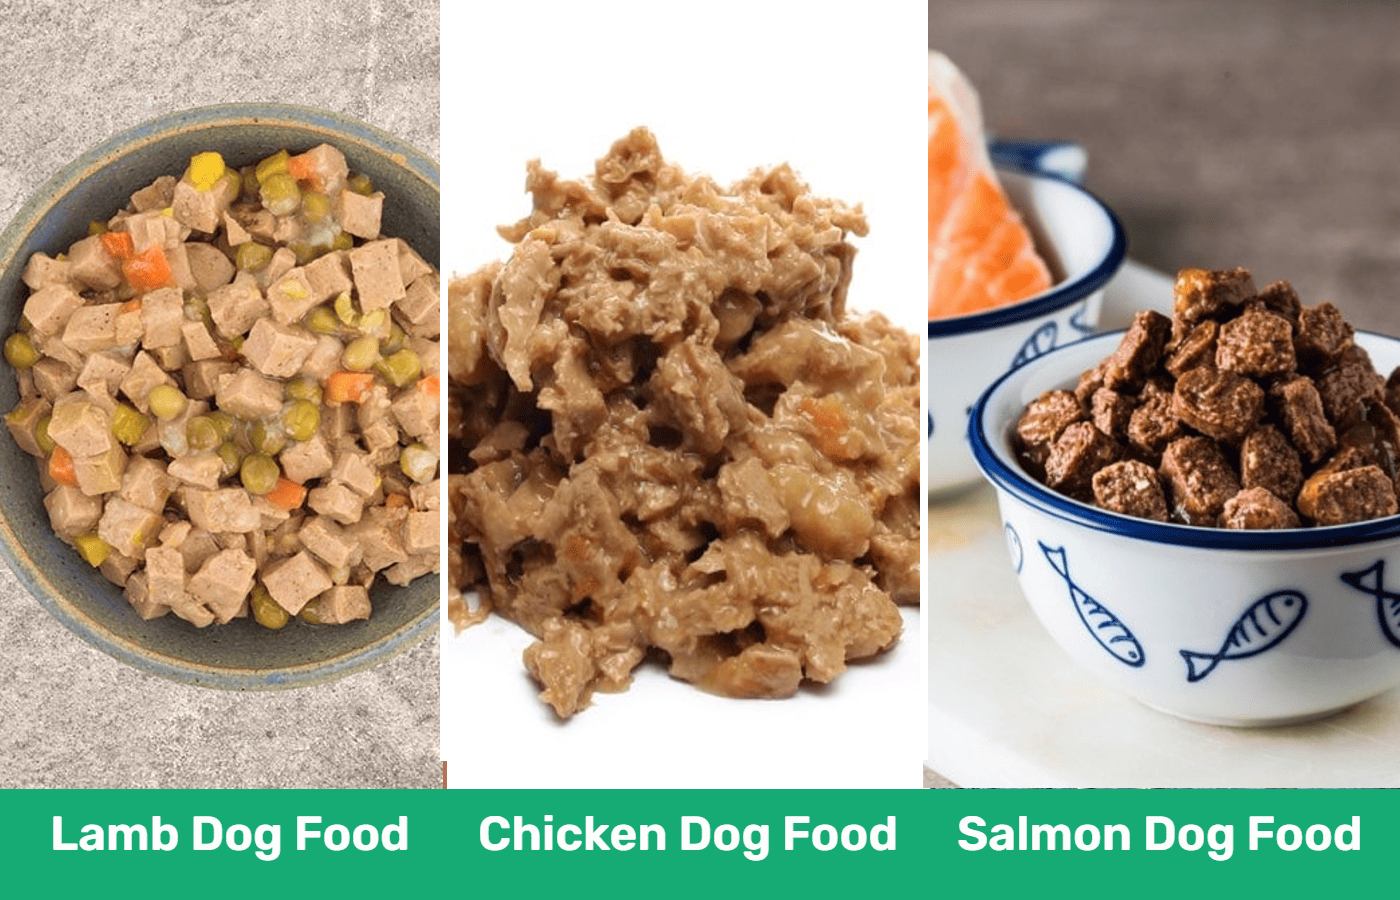 is chicken or salmon better for dogs